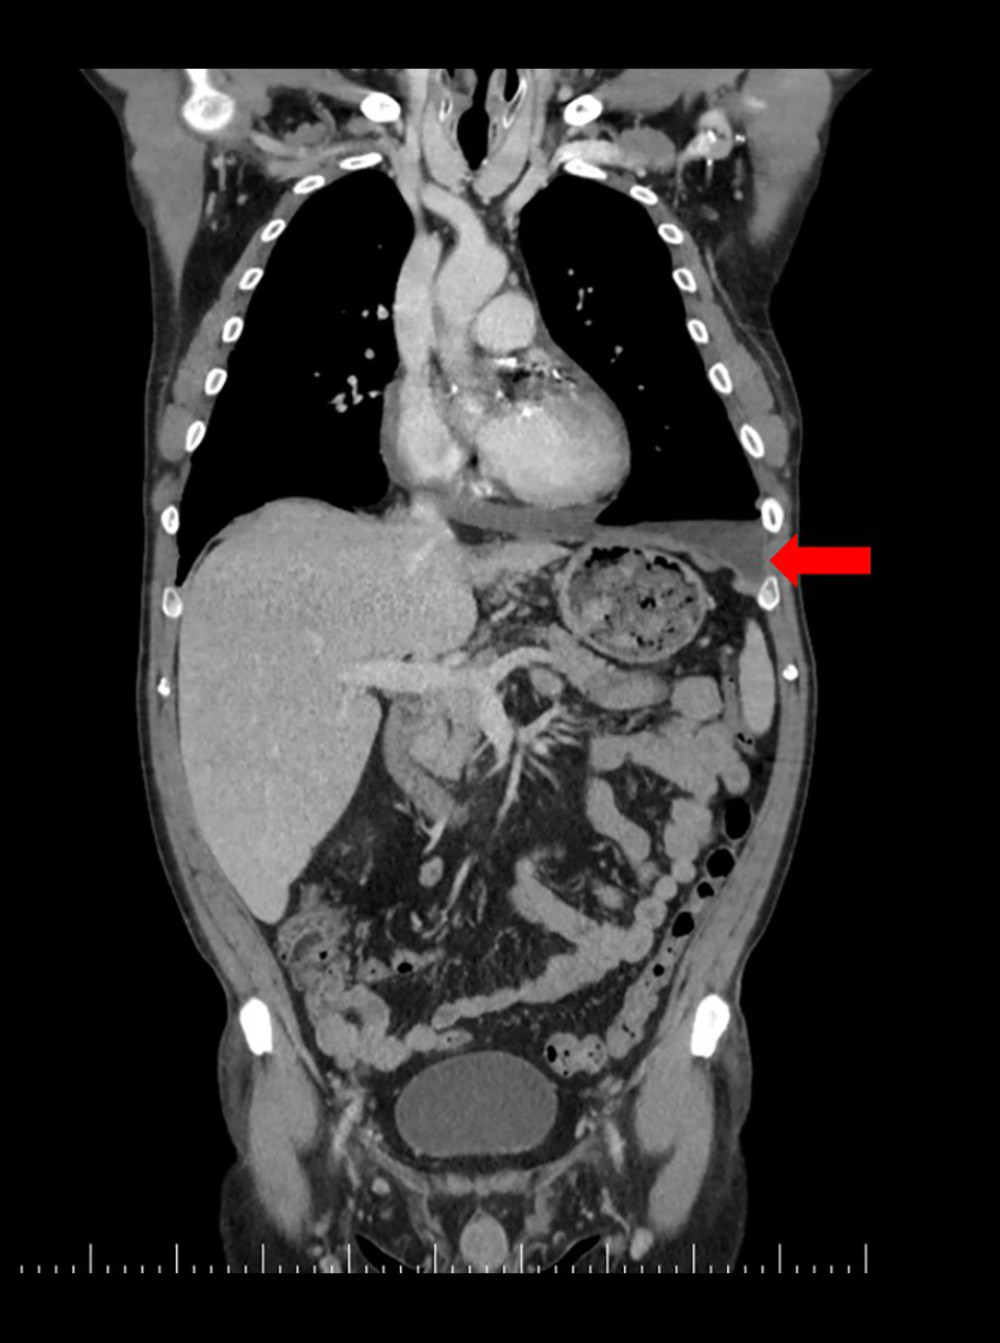 Computed tomography image of thorax, abdominal cavity, and pelvis in anterior incidence angle. In this incidence angle only the left side pleurisy is observable (arrow).